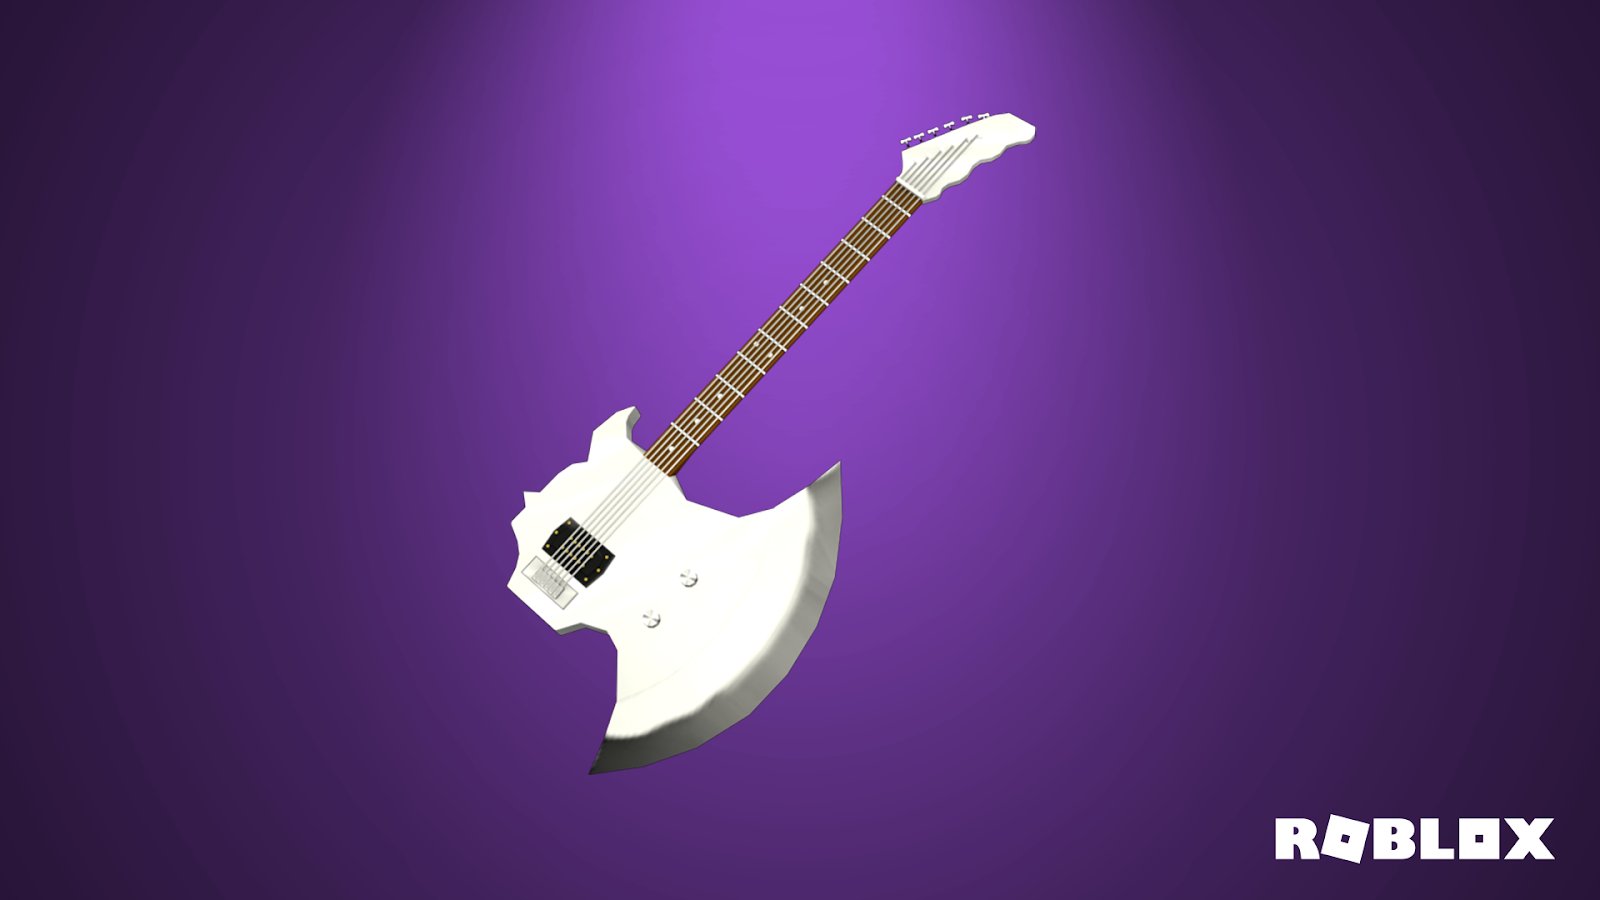 Roblox On Twitter Don T Worry All You Battle Rockers You Can Now Fight Battles And Rock Out At The Same Time Light Back Axe Guitar Https T Co Omdvg5mlxr Memorialdayweekend Roblox Https T Co Oa27a4zm9e - clockwork had a website back in 2008 for roblox wallpapers and for